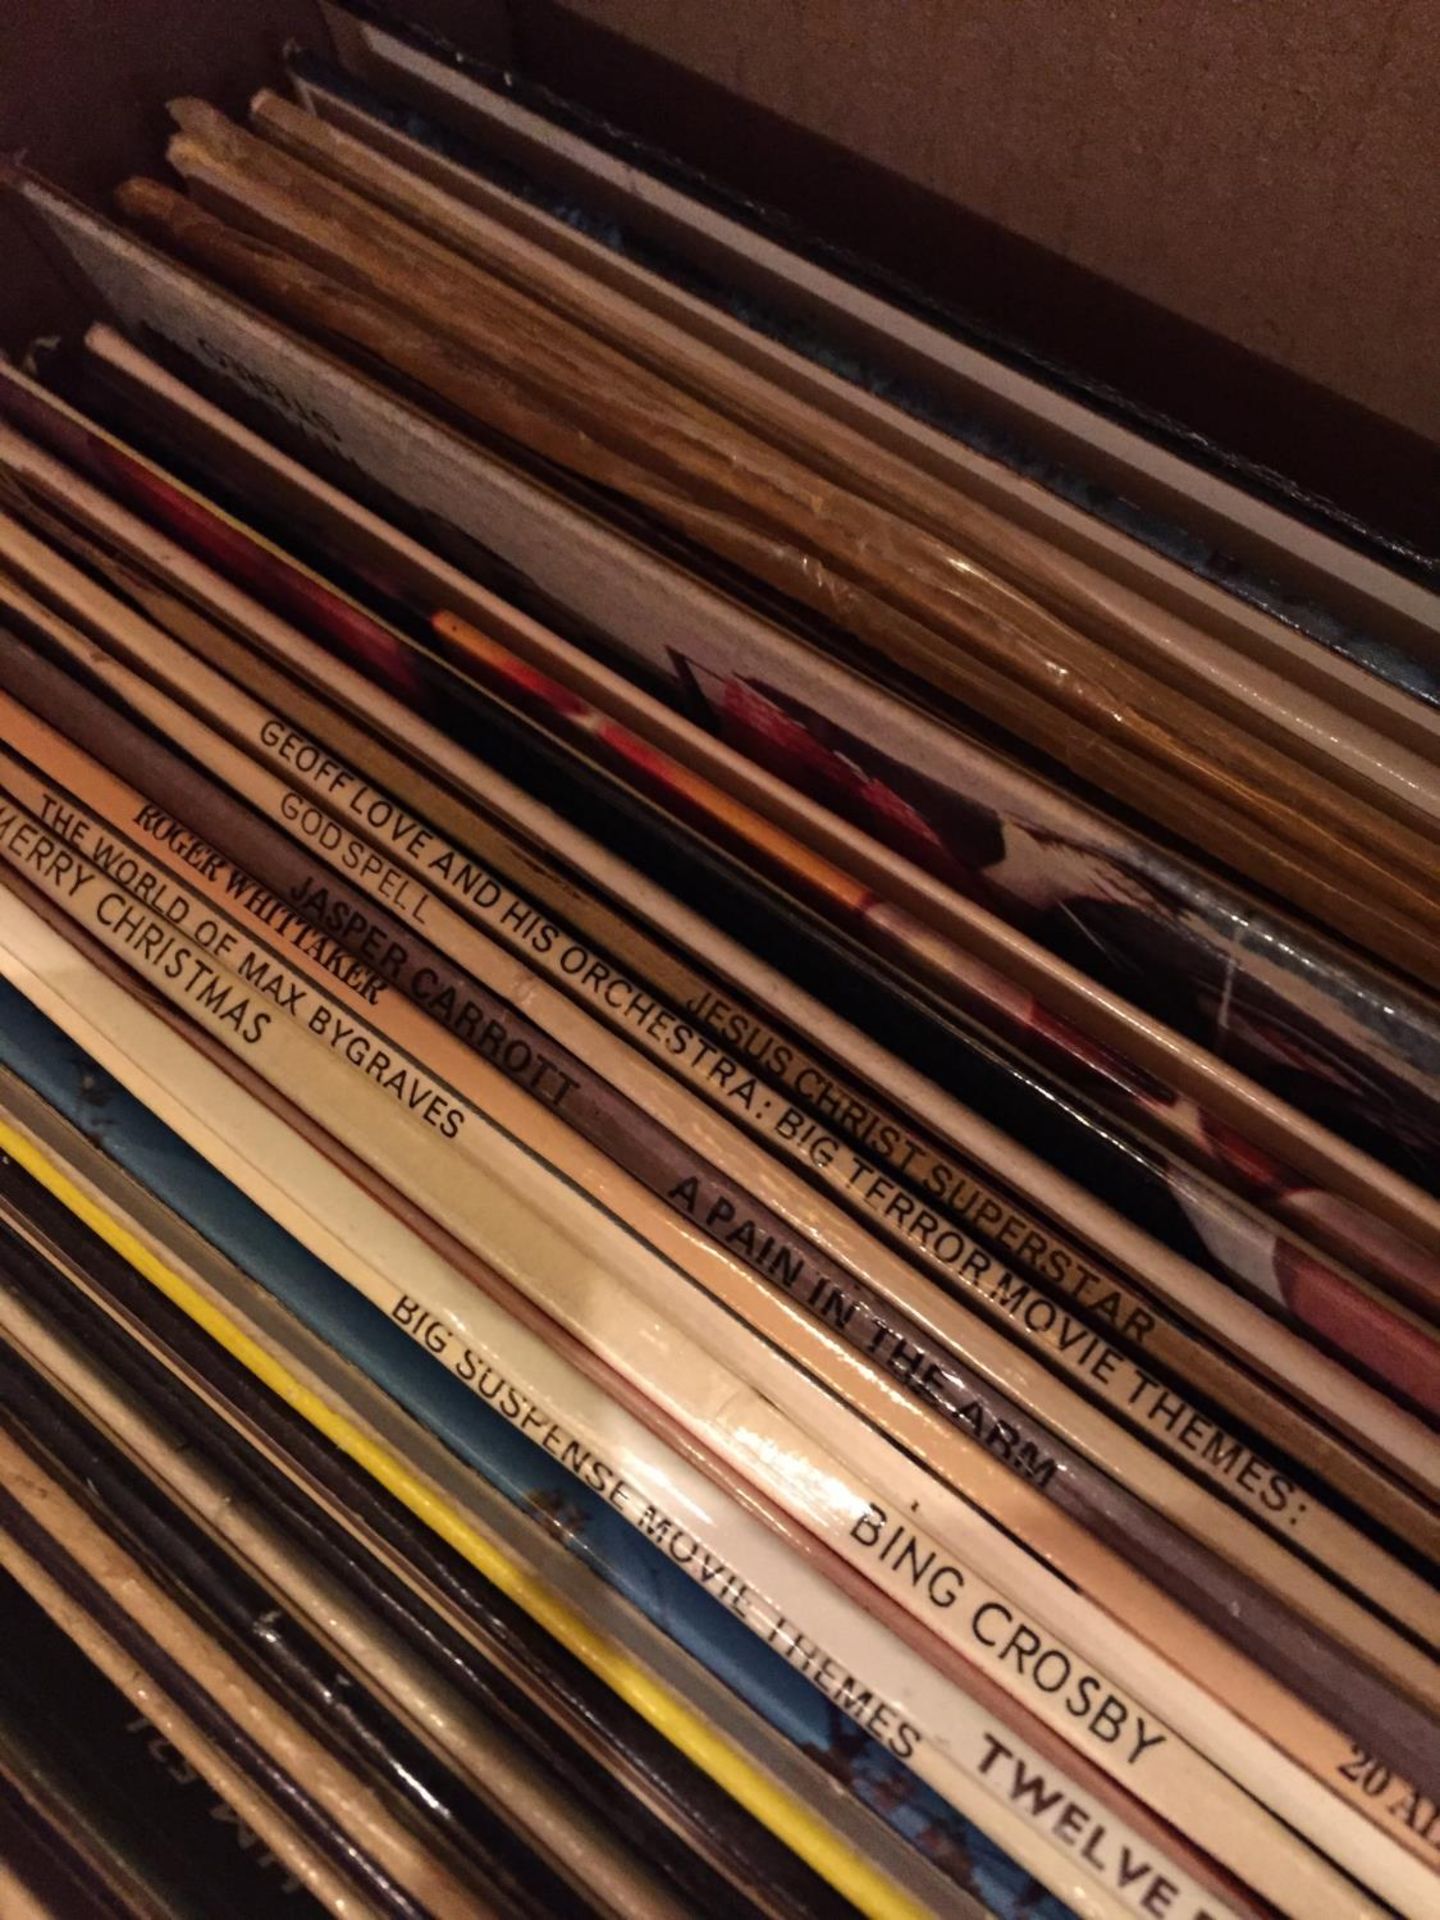 A LARGE BOX OF LP RECORDS AND A BLUE STORAGE BOX ALSO CONTAINING LP'S TO INCLUDE SINATRA, BING - Image 3 of 3